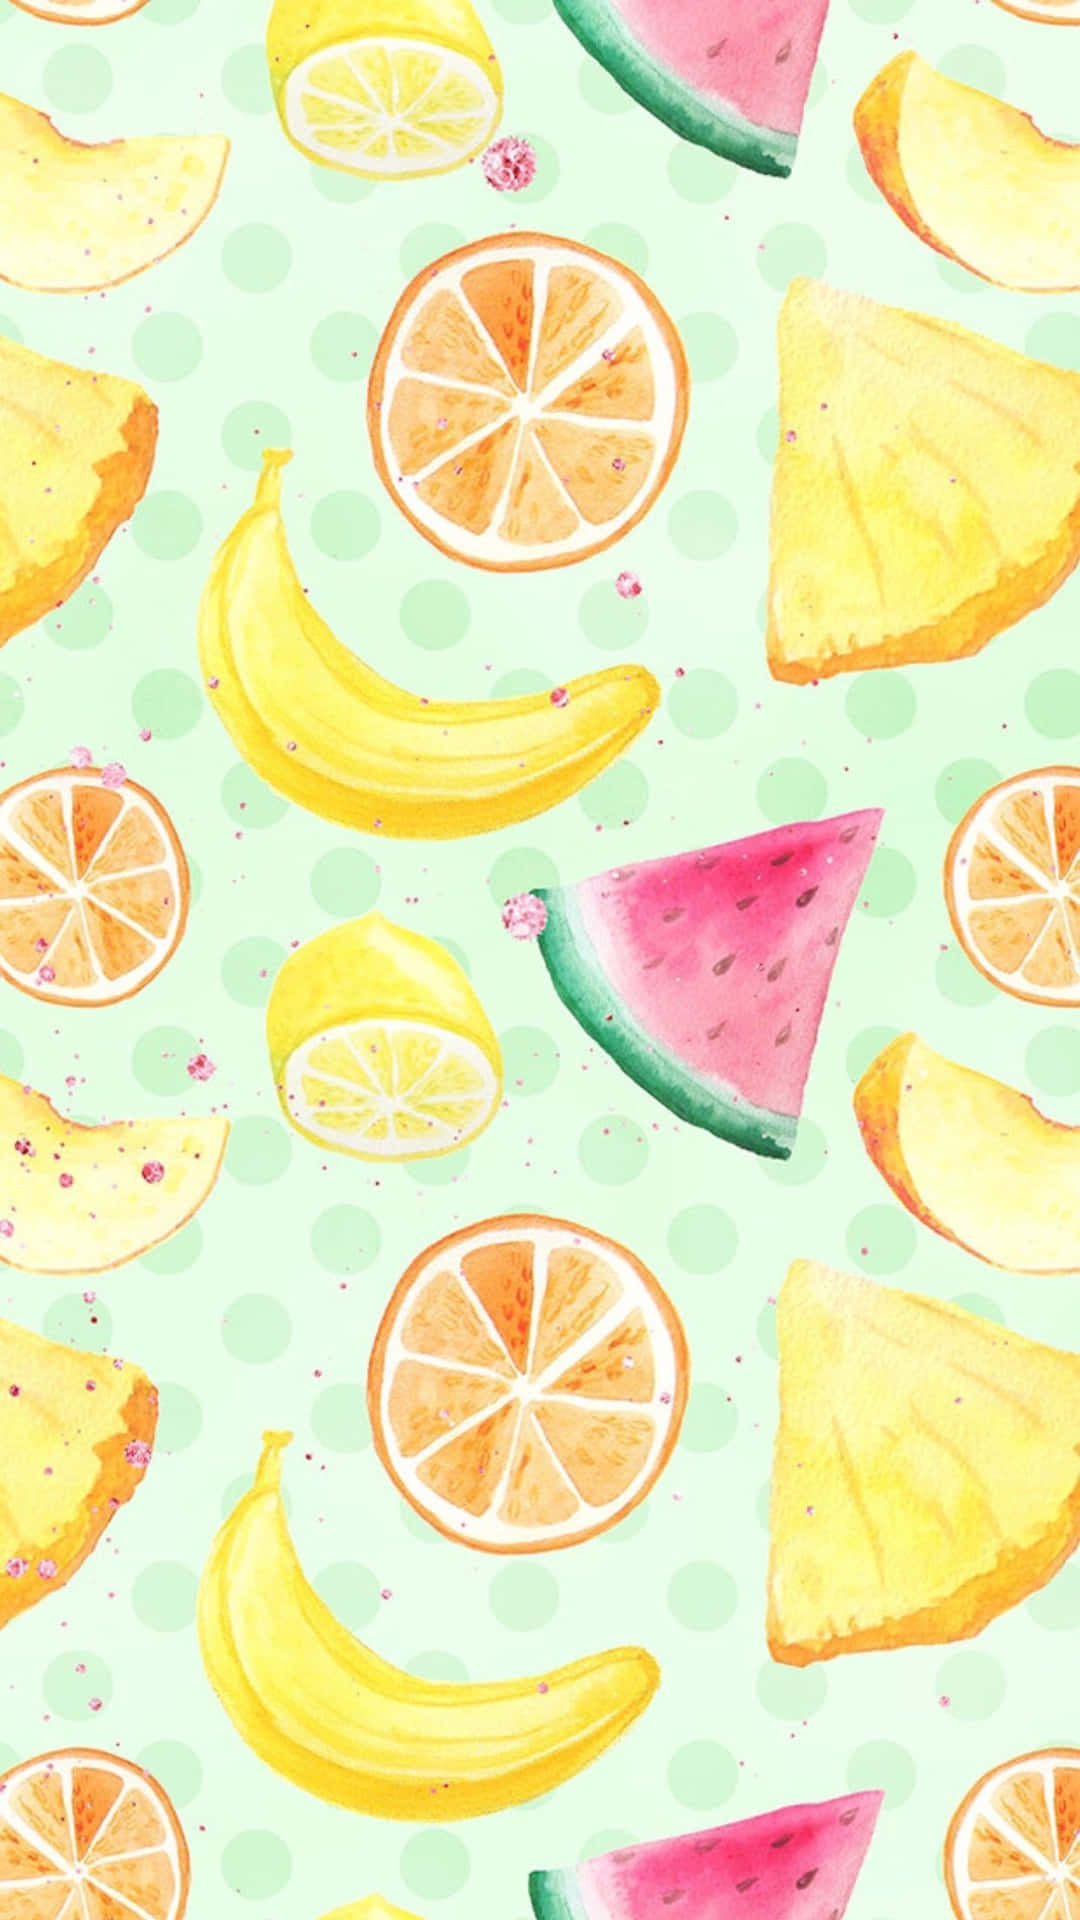 Enjoying Delicious Food On An iPhone Wallpaper